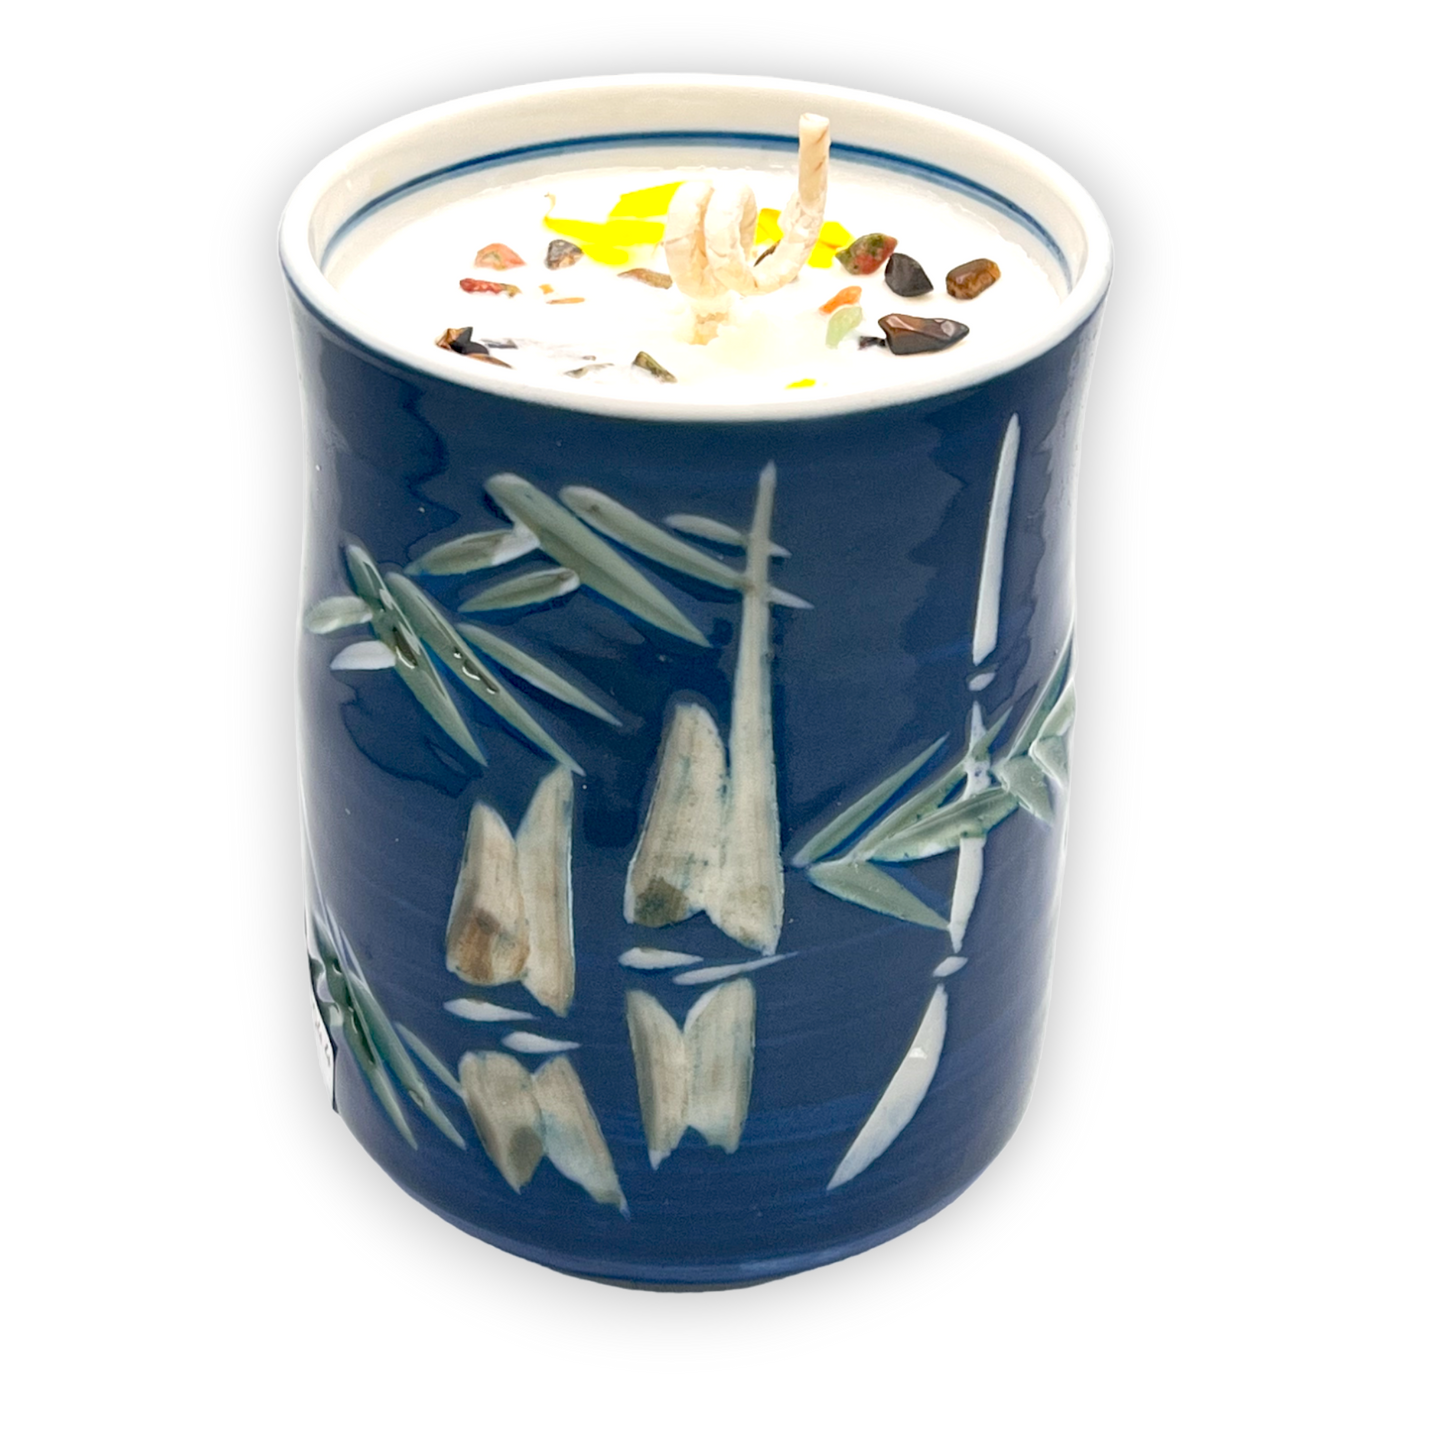 Japanese Blue & White Bamboo Vintage Teacup Candle